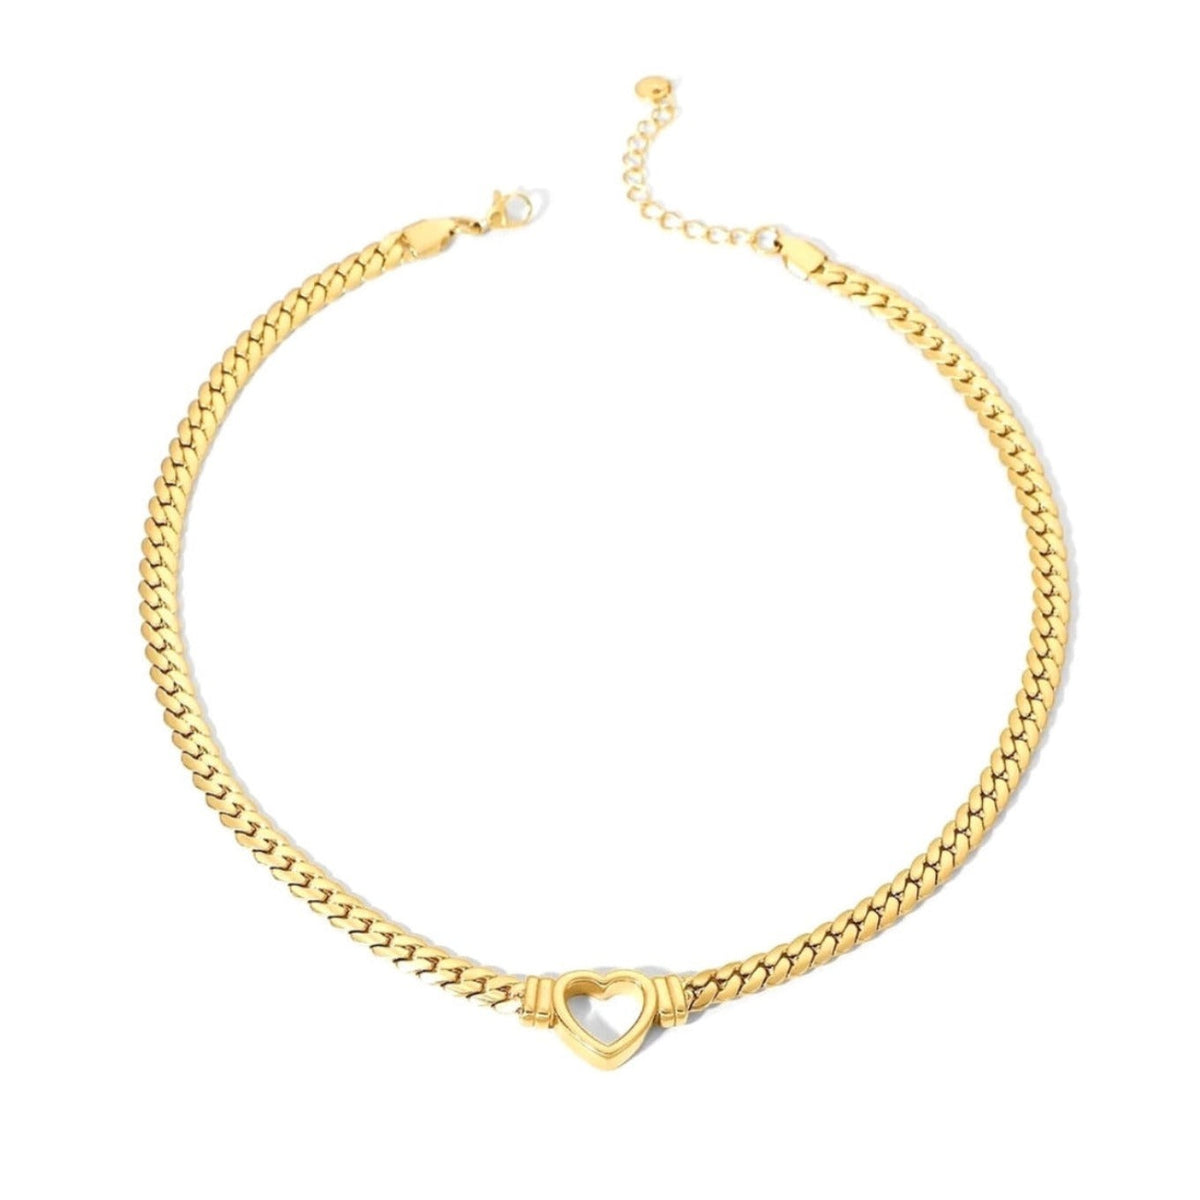  heart 18k gold plated choker necklace may-i reliquia fandh frankly my dear